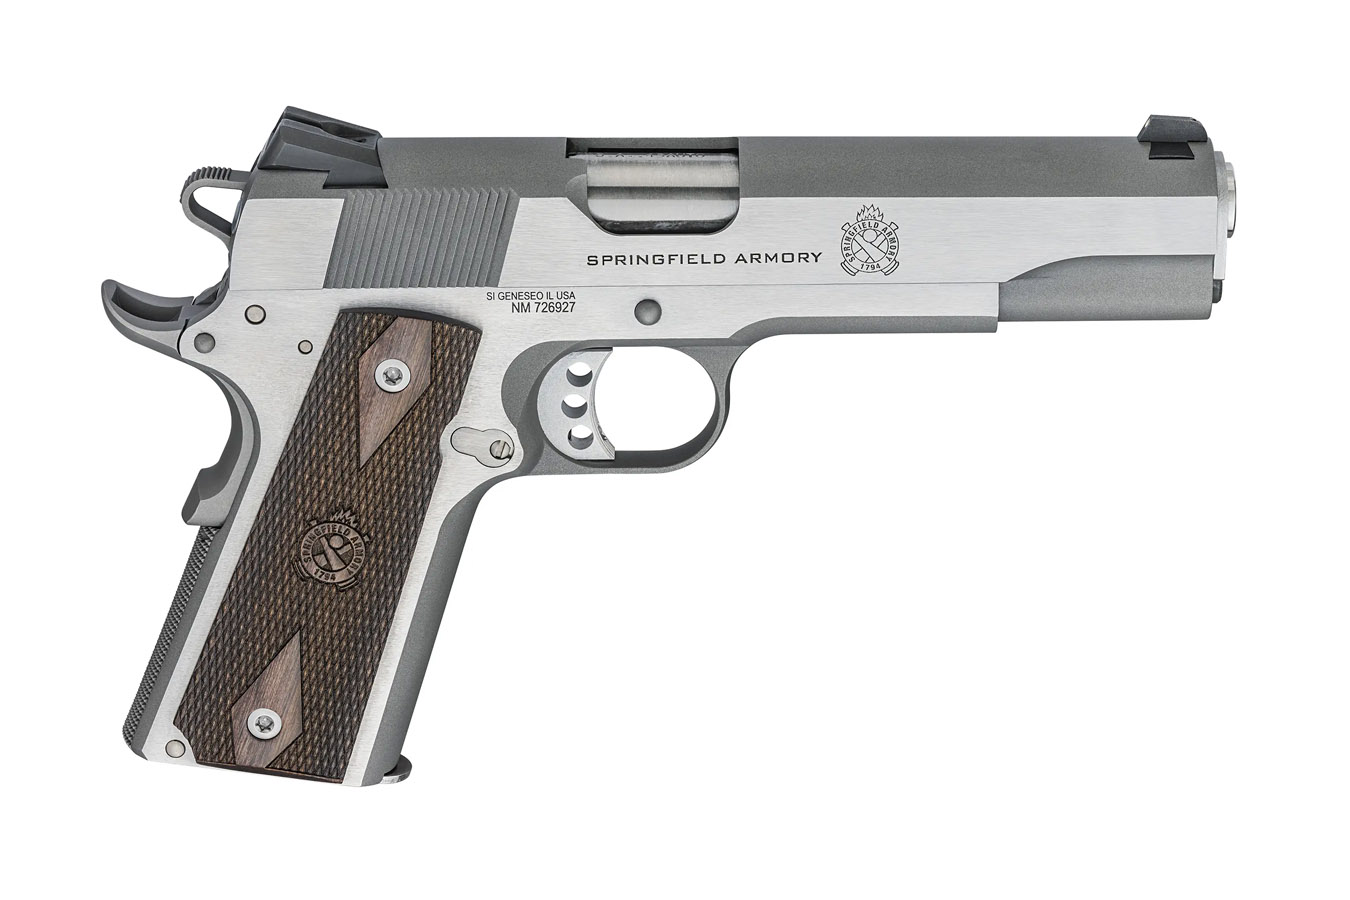 No. 10 Best Selling: SPRINGFIELD 1911 GARRISON 45 ACP FULL-SIZE STAINLESS PISTOL